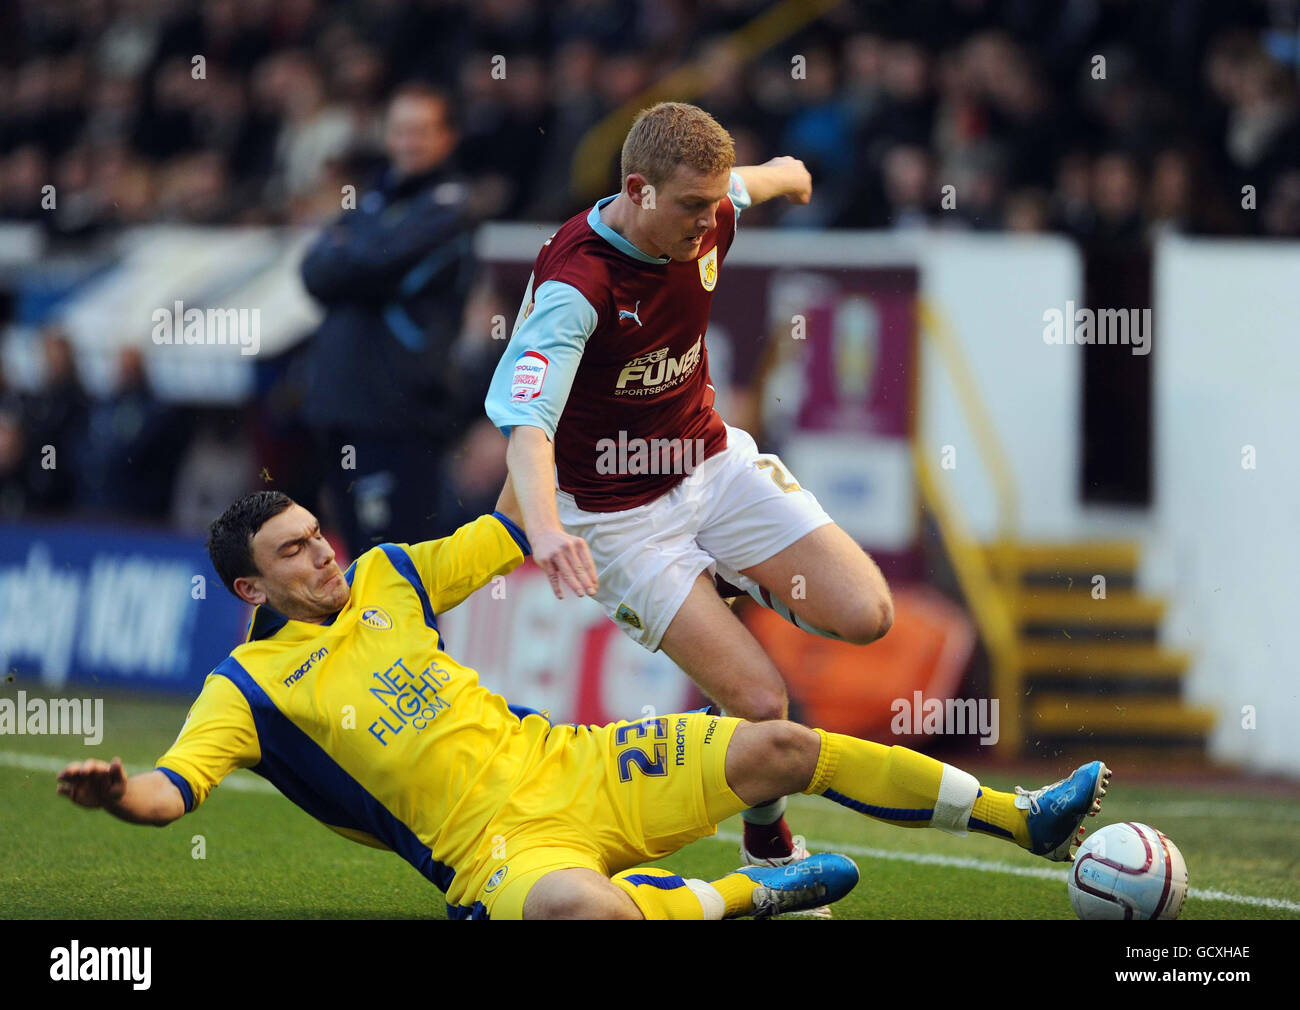 Burnley's Brian Easton (top) battles for the ball with Leed's Robert Snodgrass during the npower Football League Championship at Turf Moor, Burnley. Stock Photo